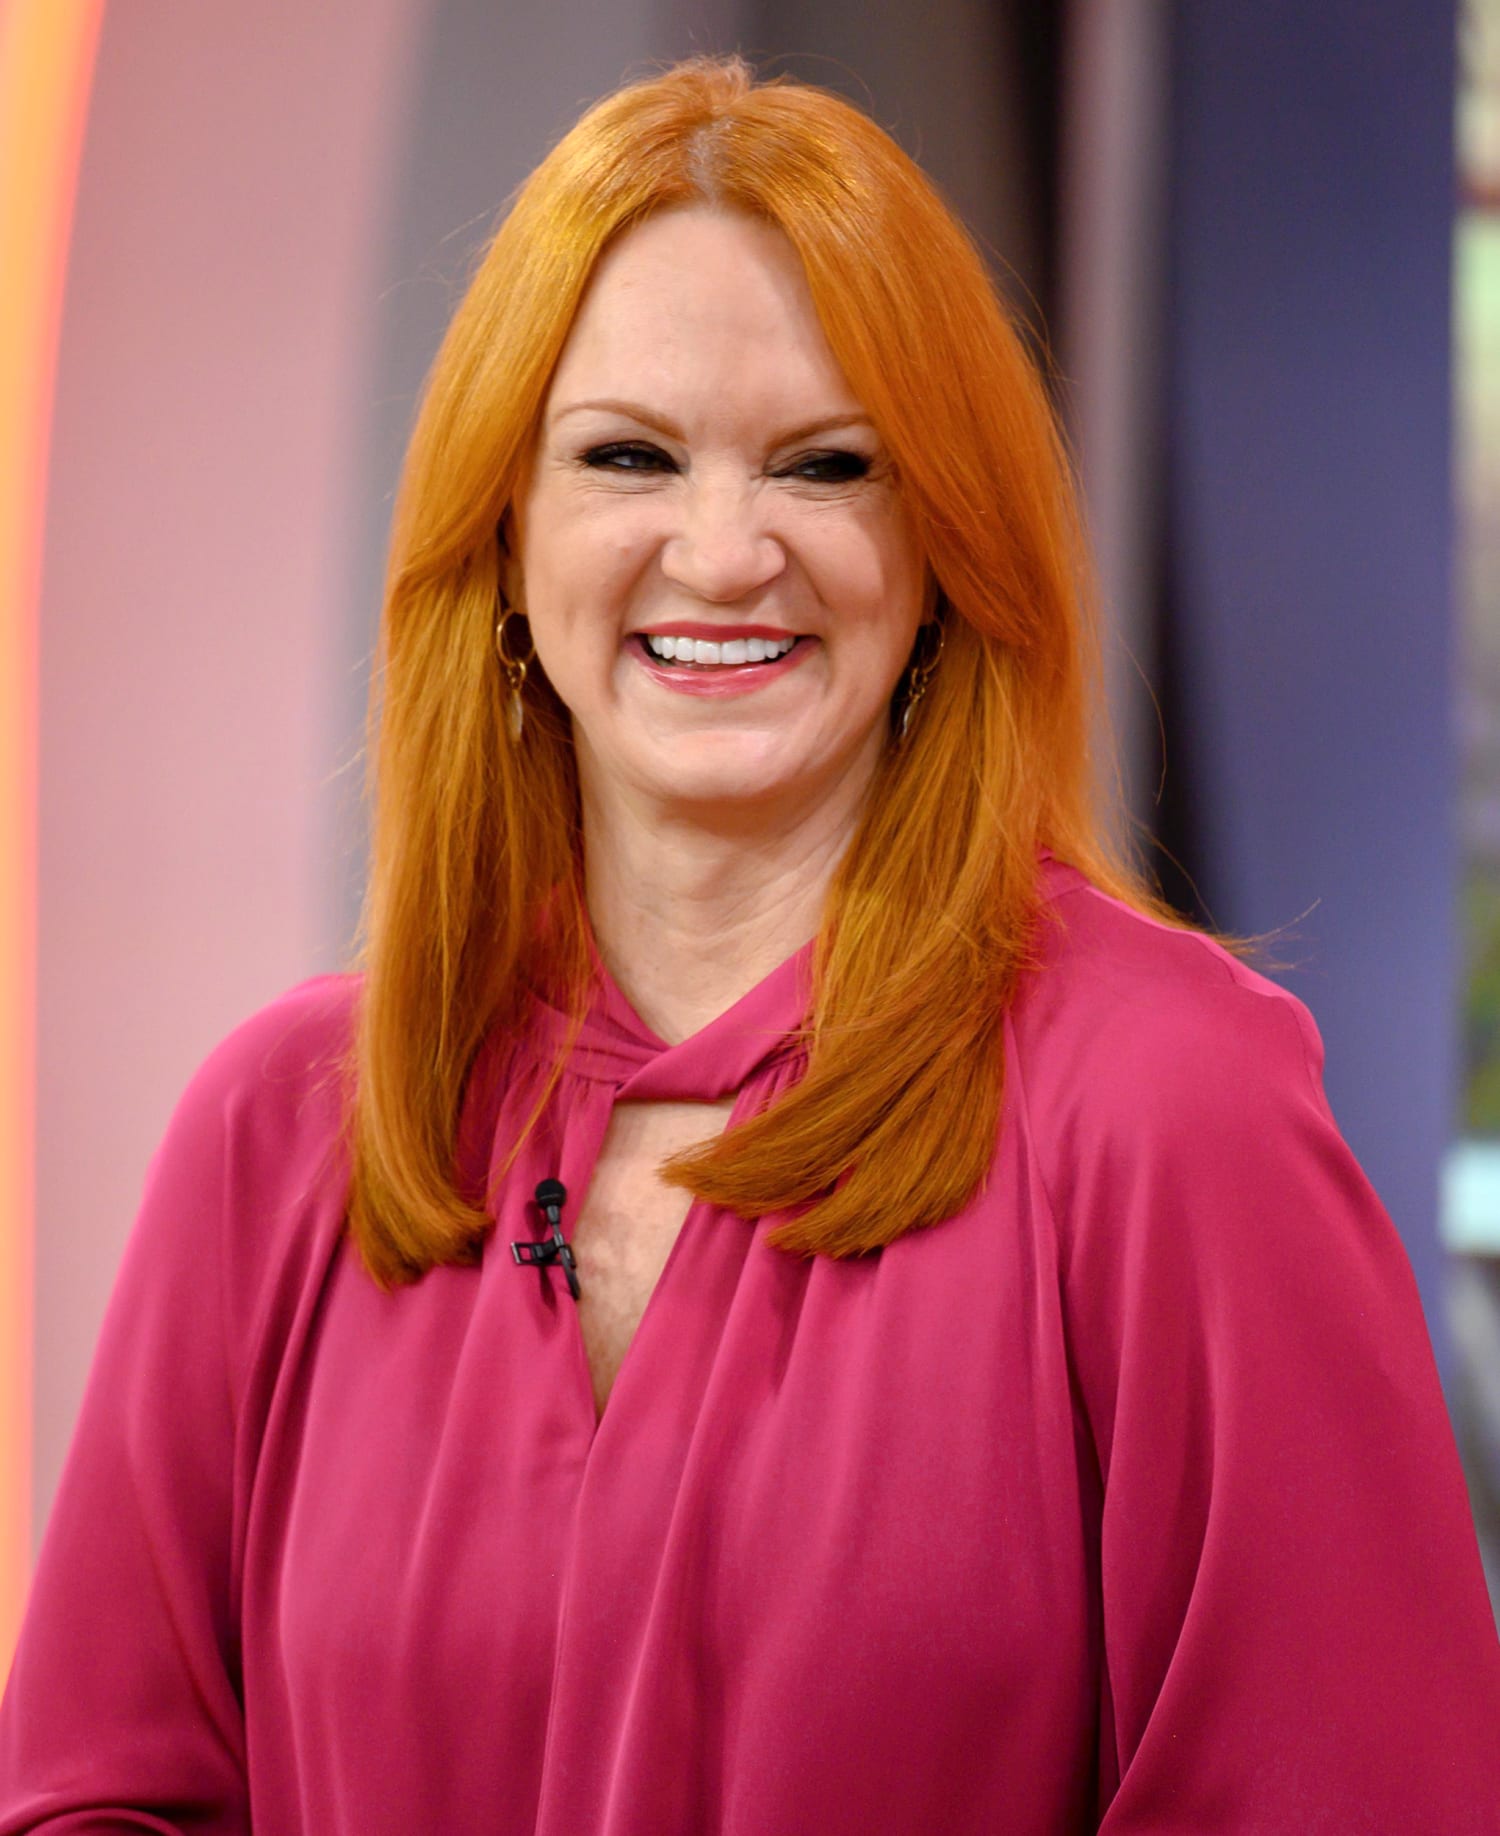 Ree Drummond On 10 Things She Learned After 55-Pound Weight Loss